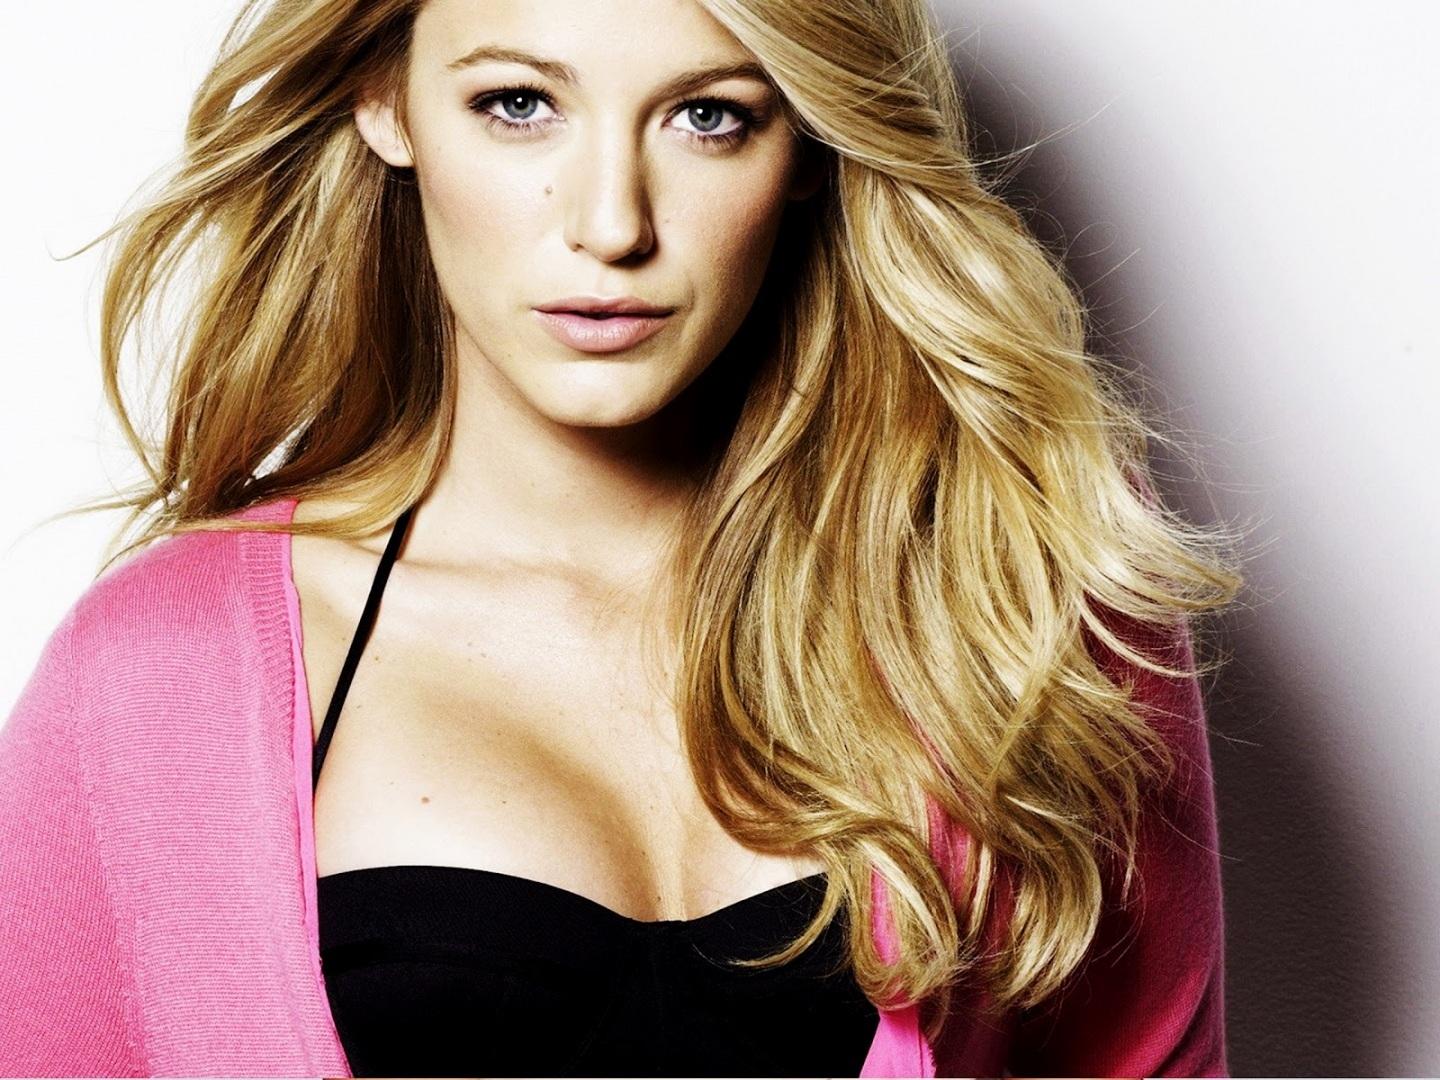 Blake Lively Movies HD Wallpaper, Background Image